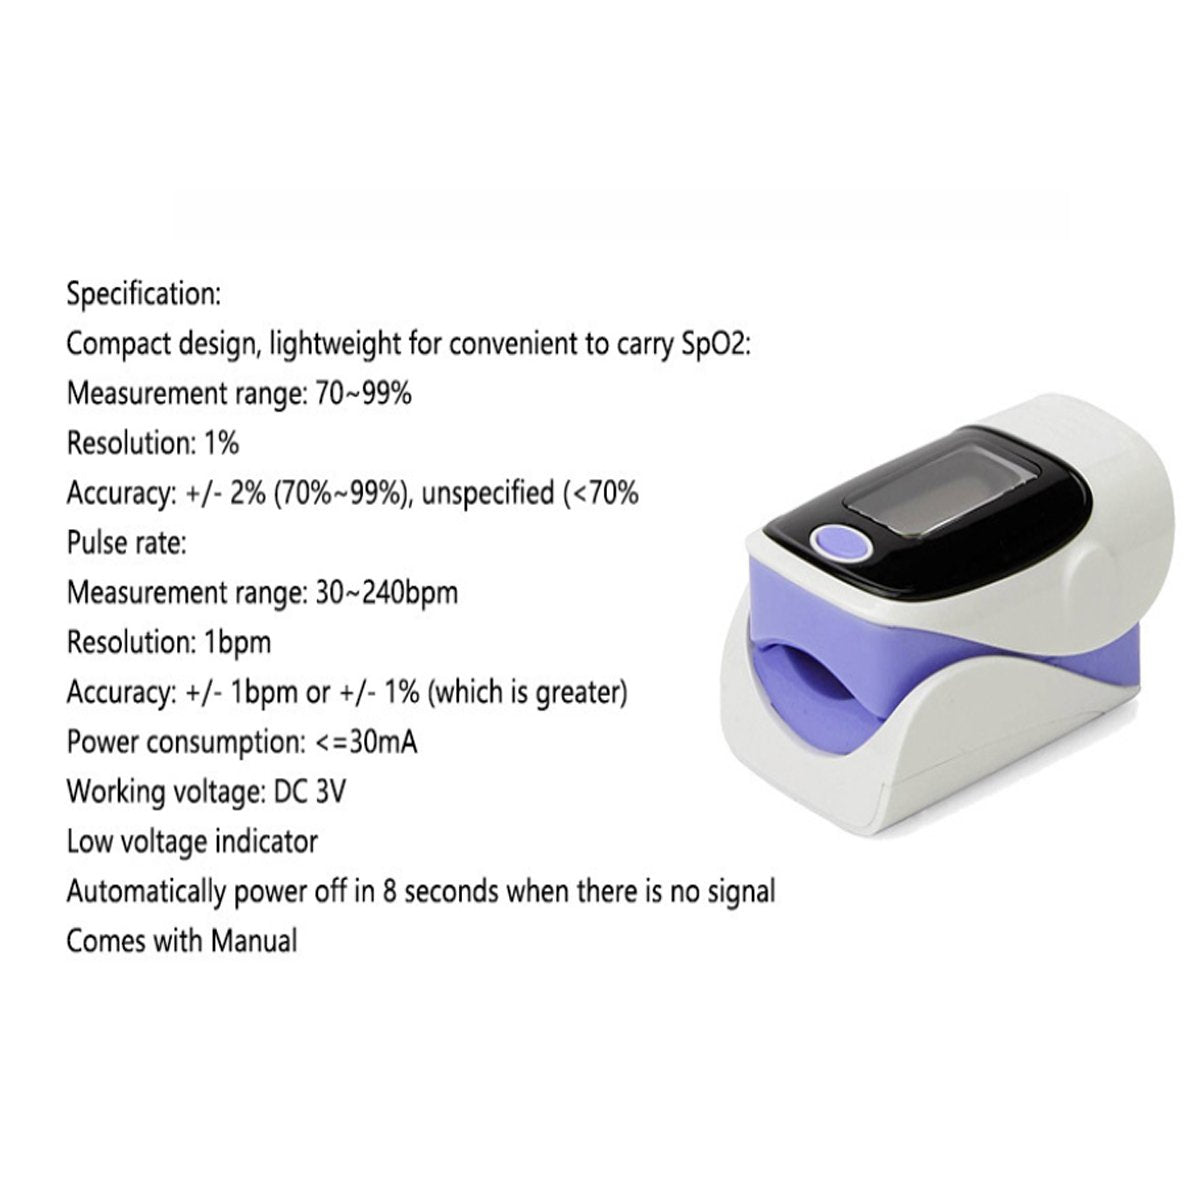 Fingertip Pulse Oximeter And Blood Oxygen Saturation Monitor With LED